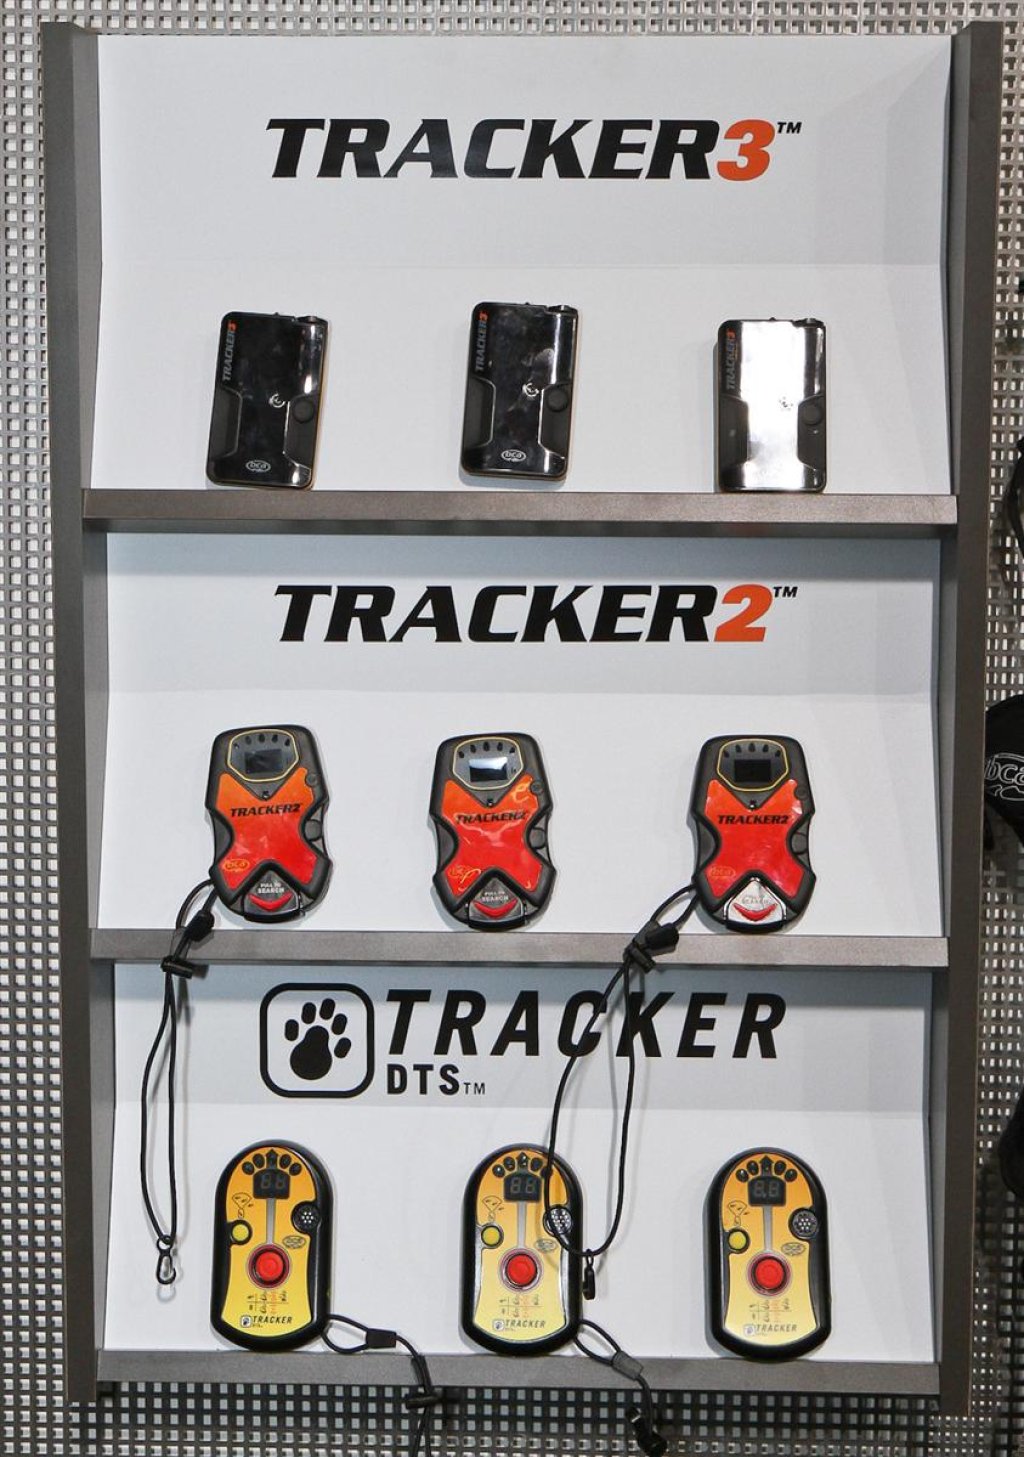 The Tracker LVS range. The new Tracker3 will finally be available for the coming winter season